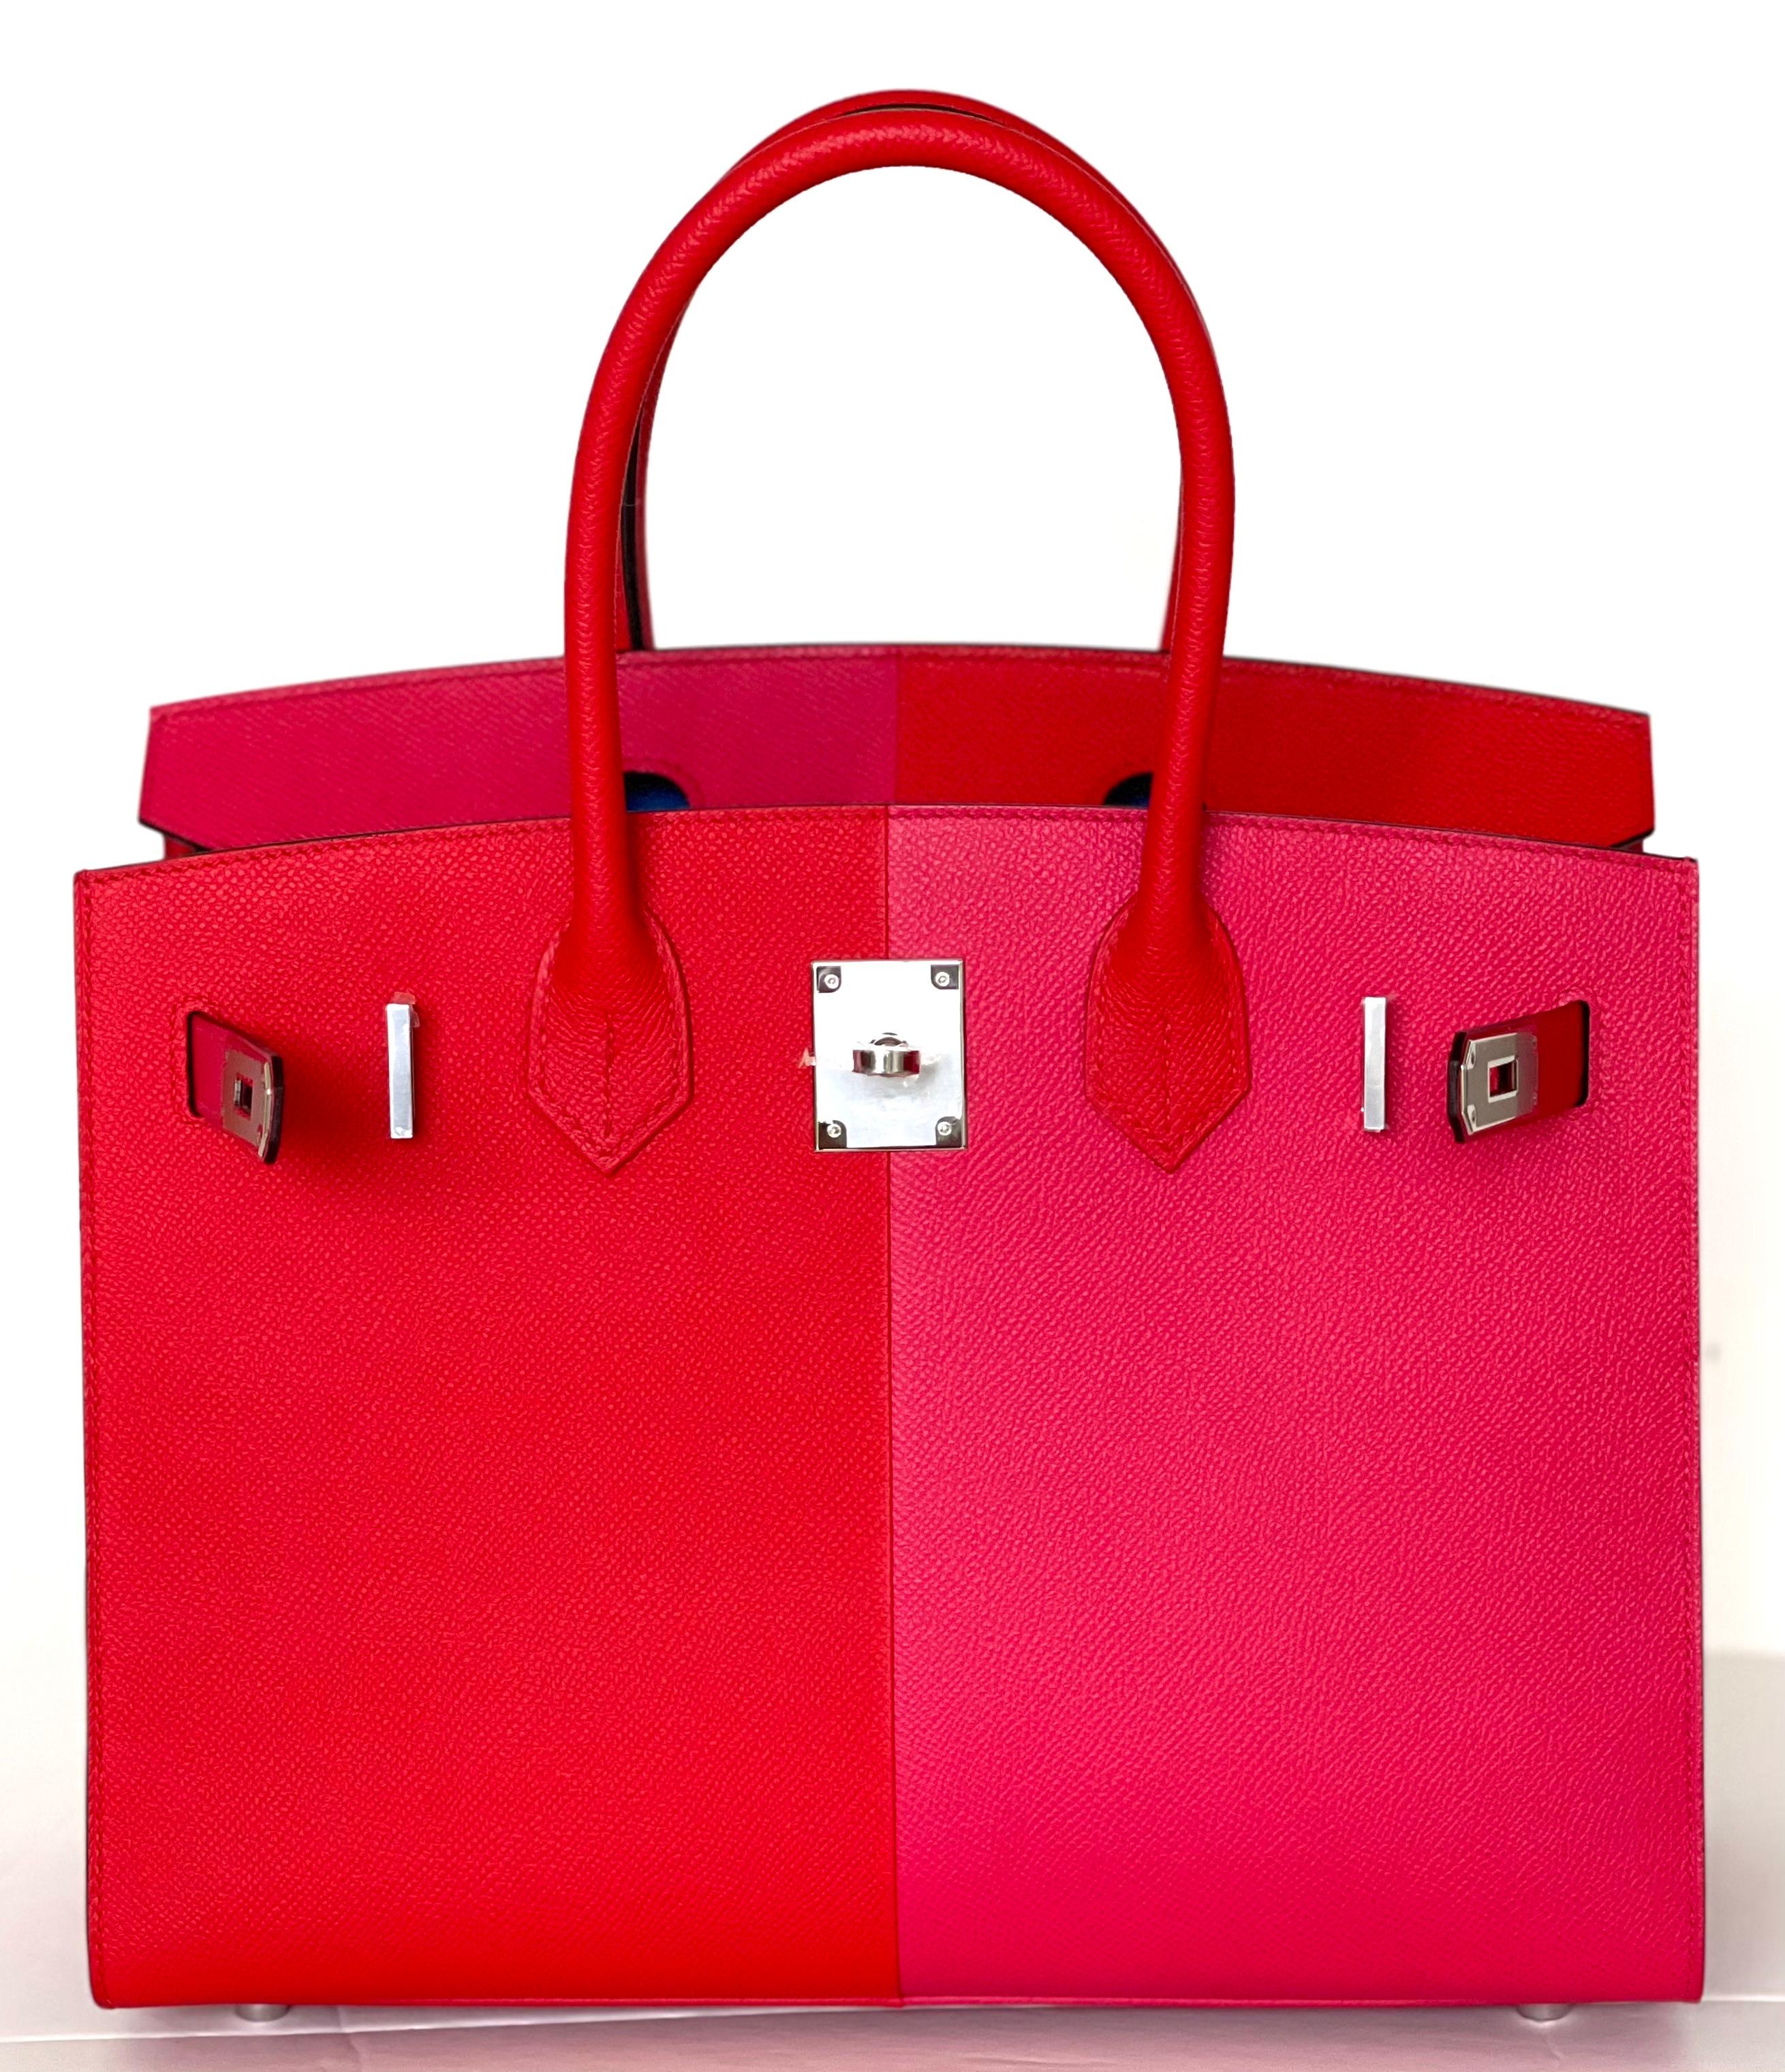 This Special Birkin is Sellier Style, with the stitching on the outside (rigid).

Birkin 30 Rouge de Coeur Rose Extreme Blue Zanzibar
Sellier style
Palladium Hardware
Epsom Leather
Engraved zipper pull
Lined in Chevre leather
Collection: Z
Comes in